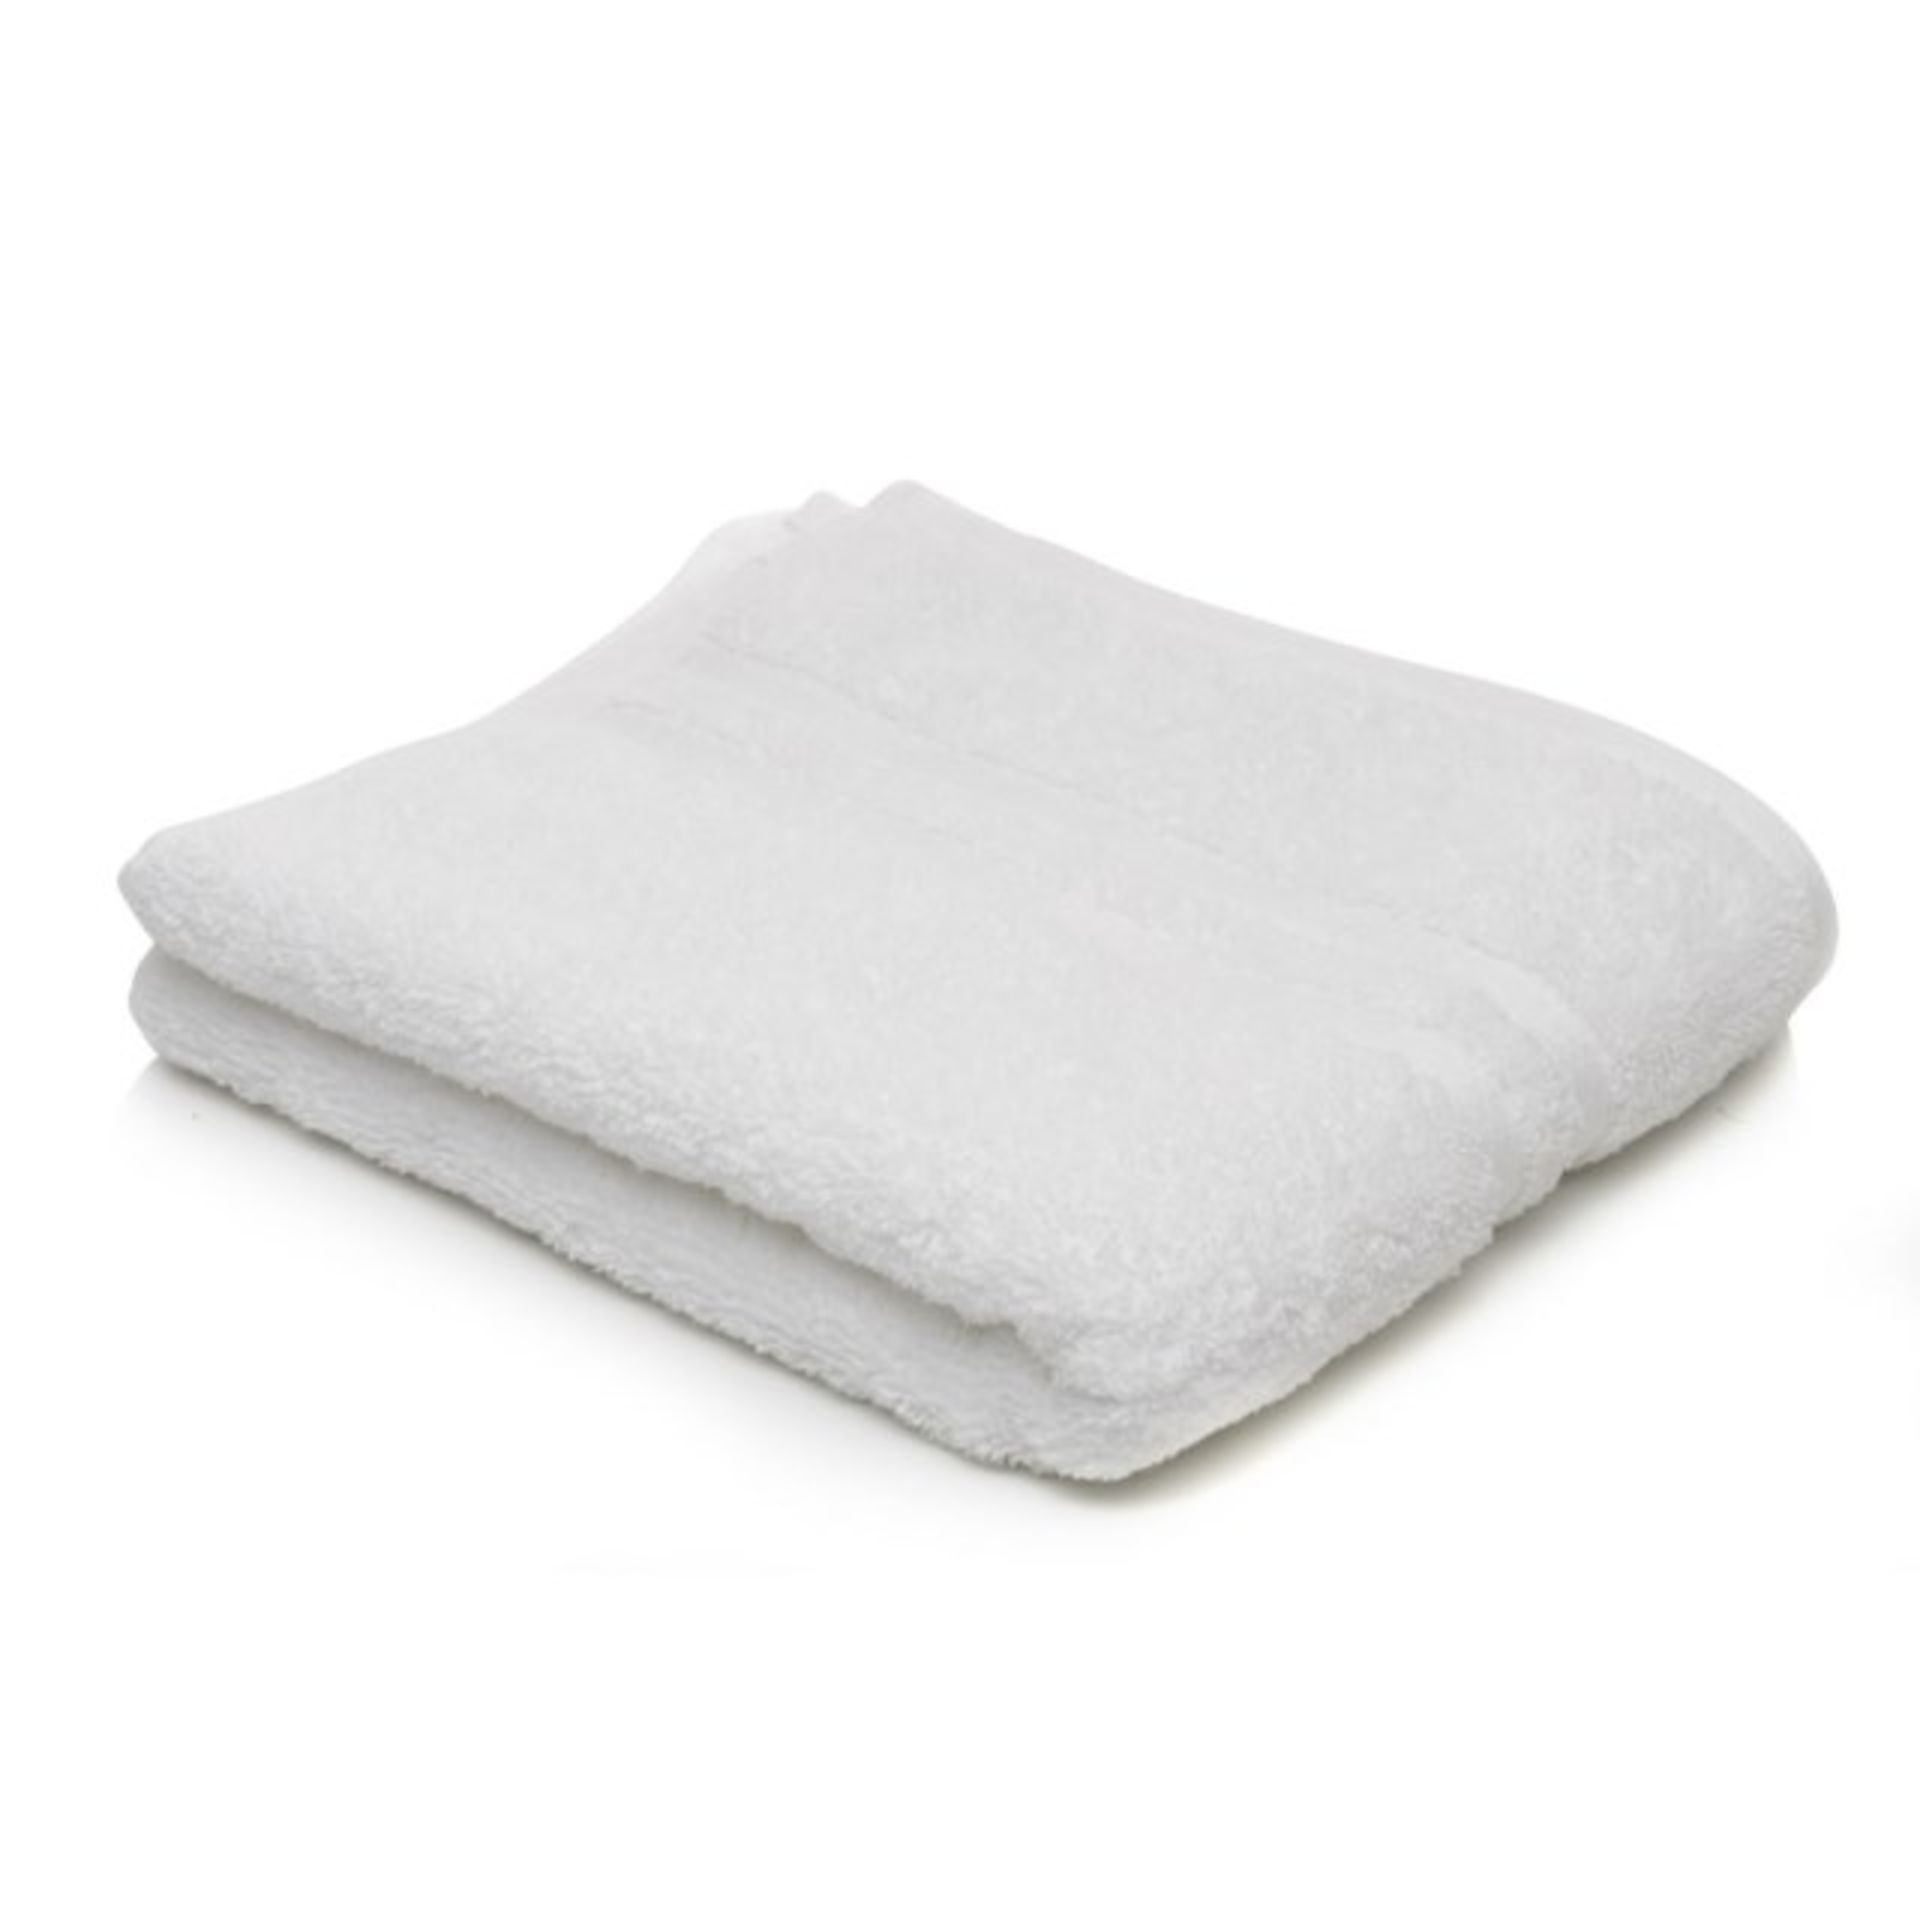 V Brand New Hotel Quality Large Cotton Bath Sheet X 6 Bid price to be multiplied by Six